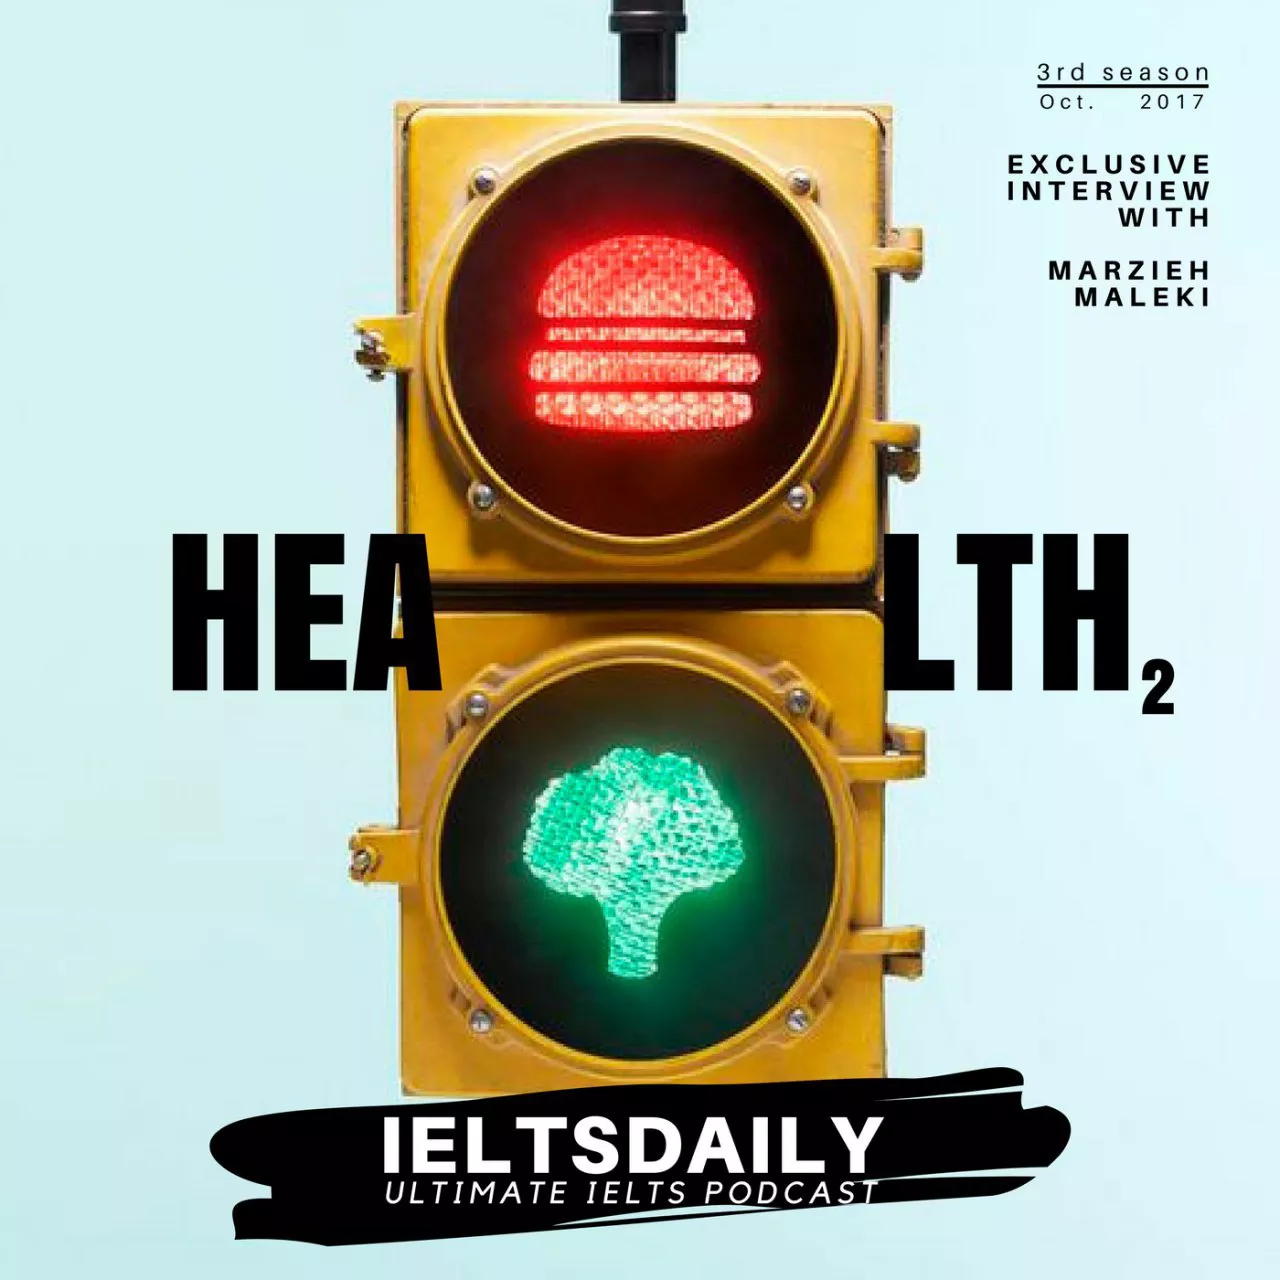 Ultimate IELTS Podcast S03E06 by IELTSDaily